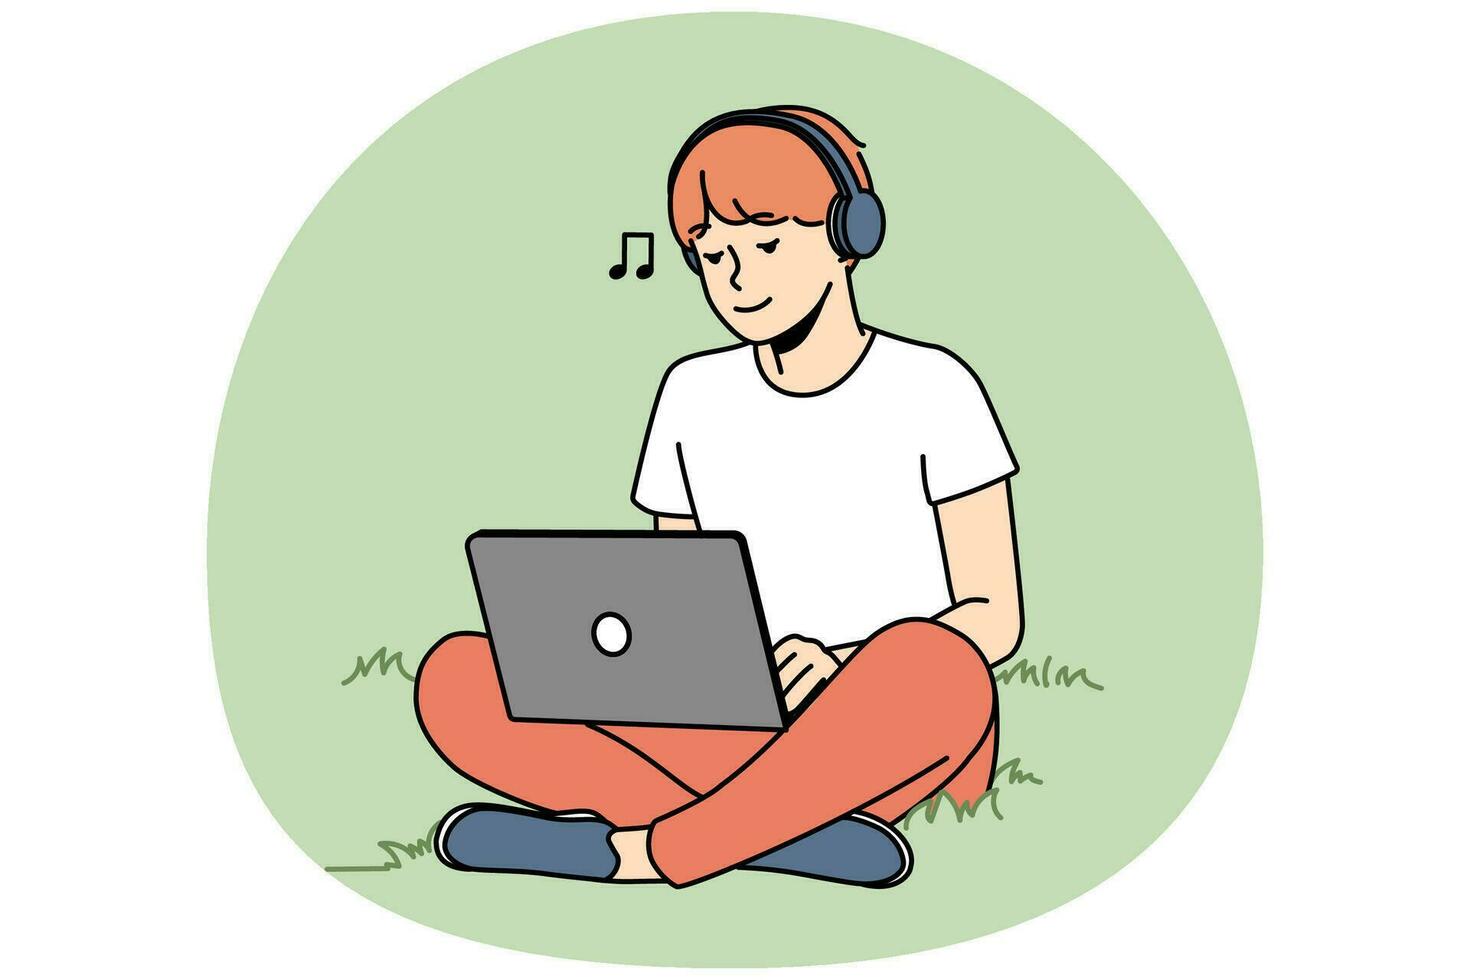 Guy sitting on grass outdoors working on laptop wearing earphones. Happy man relax outside with computer listen to music in headphones. Vector illustration.